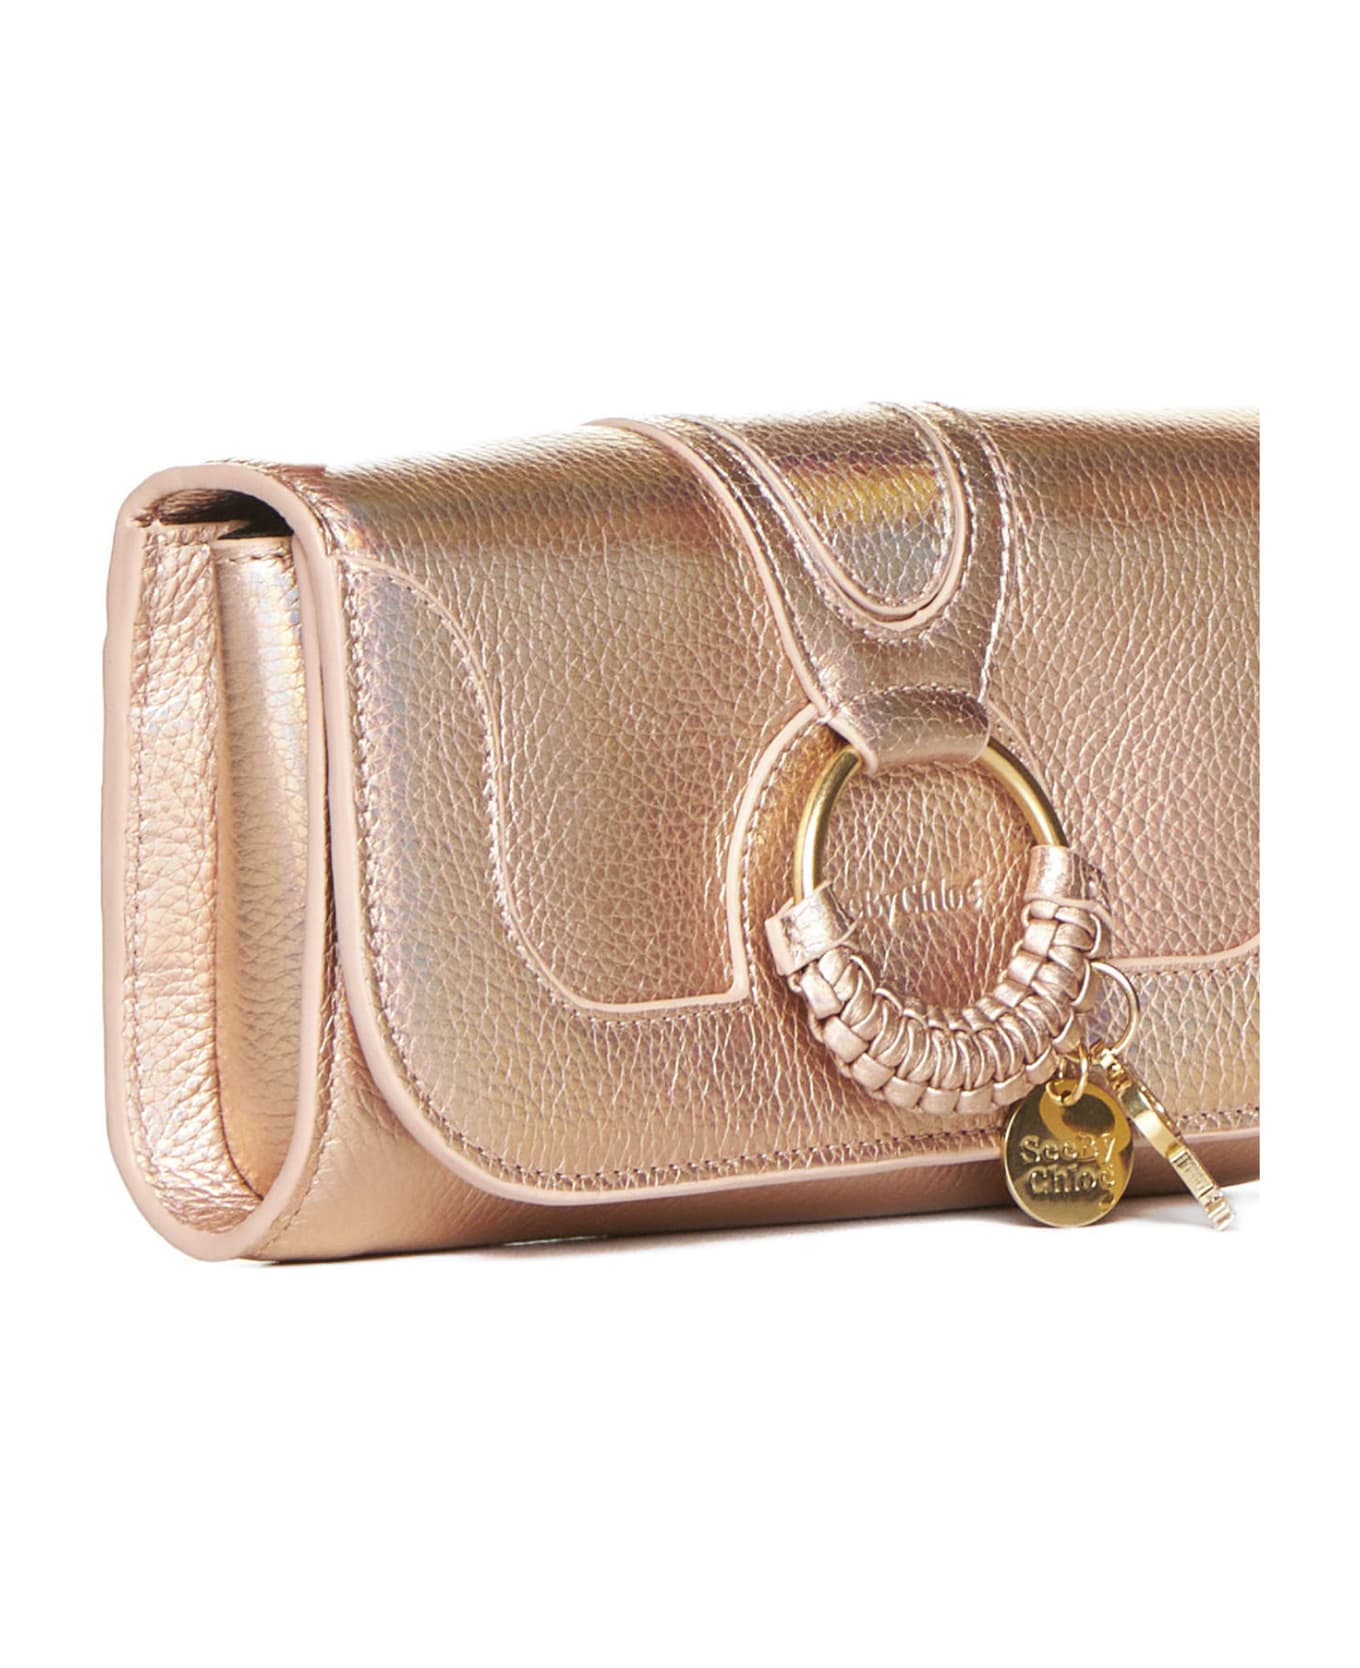 See by Chloé Shoulder Bag - Golden dust ショルダーバッグ